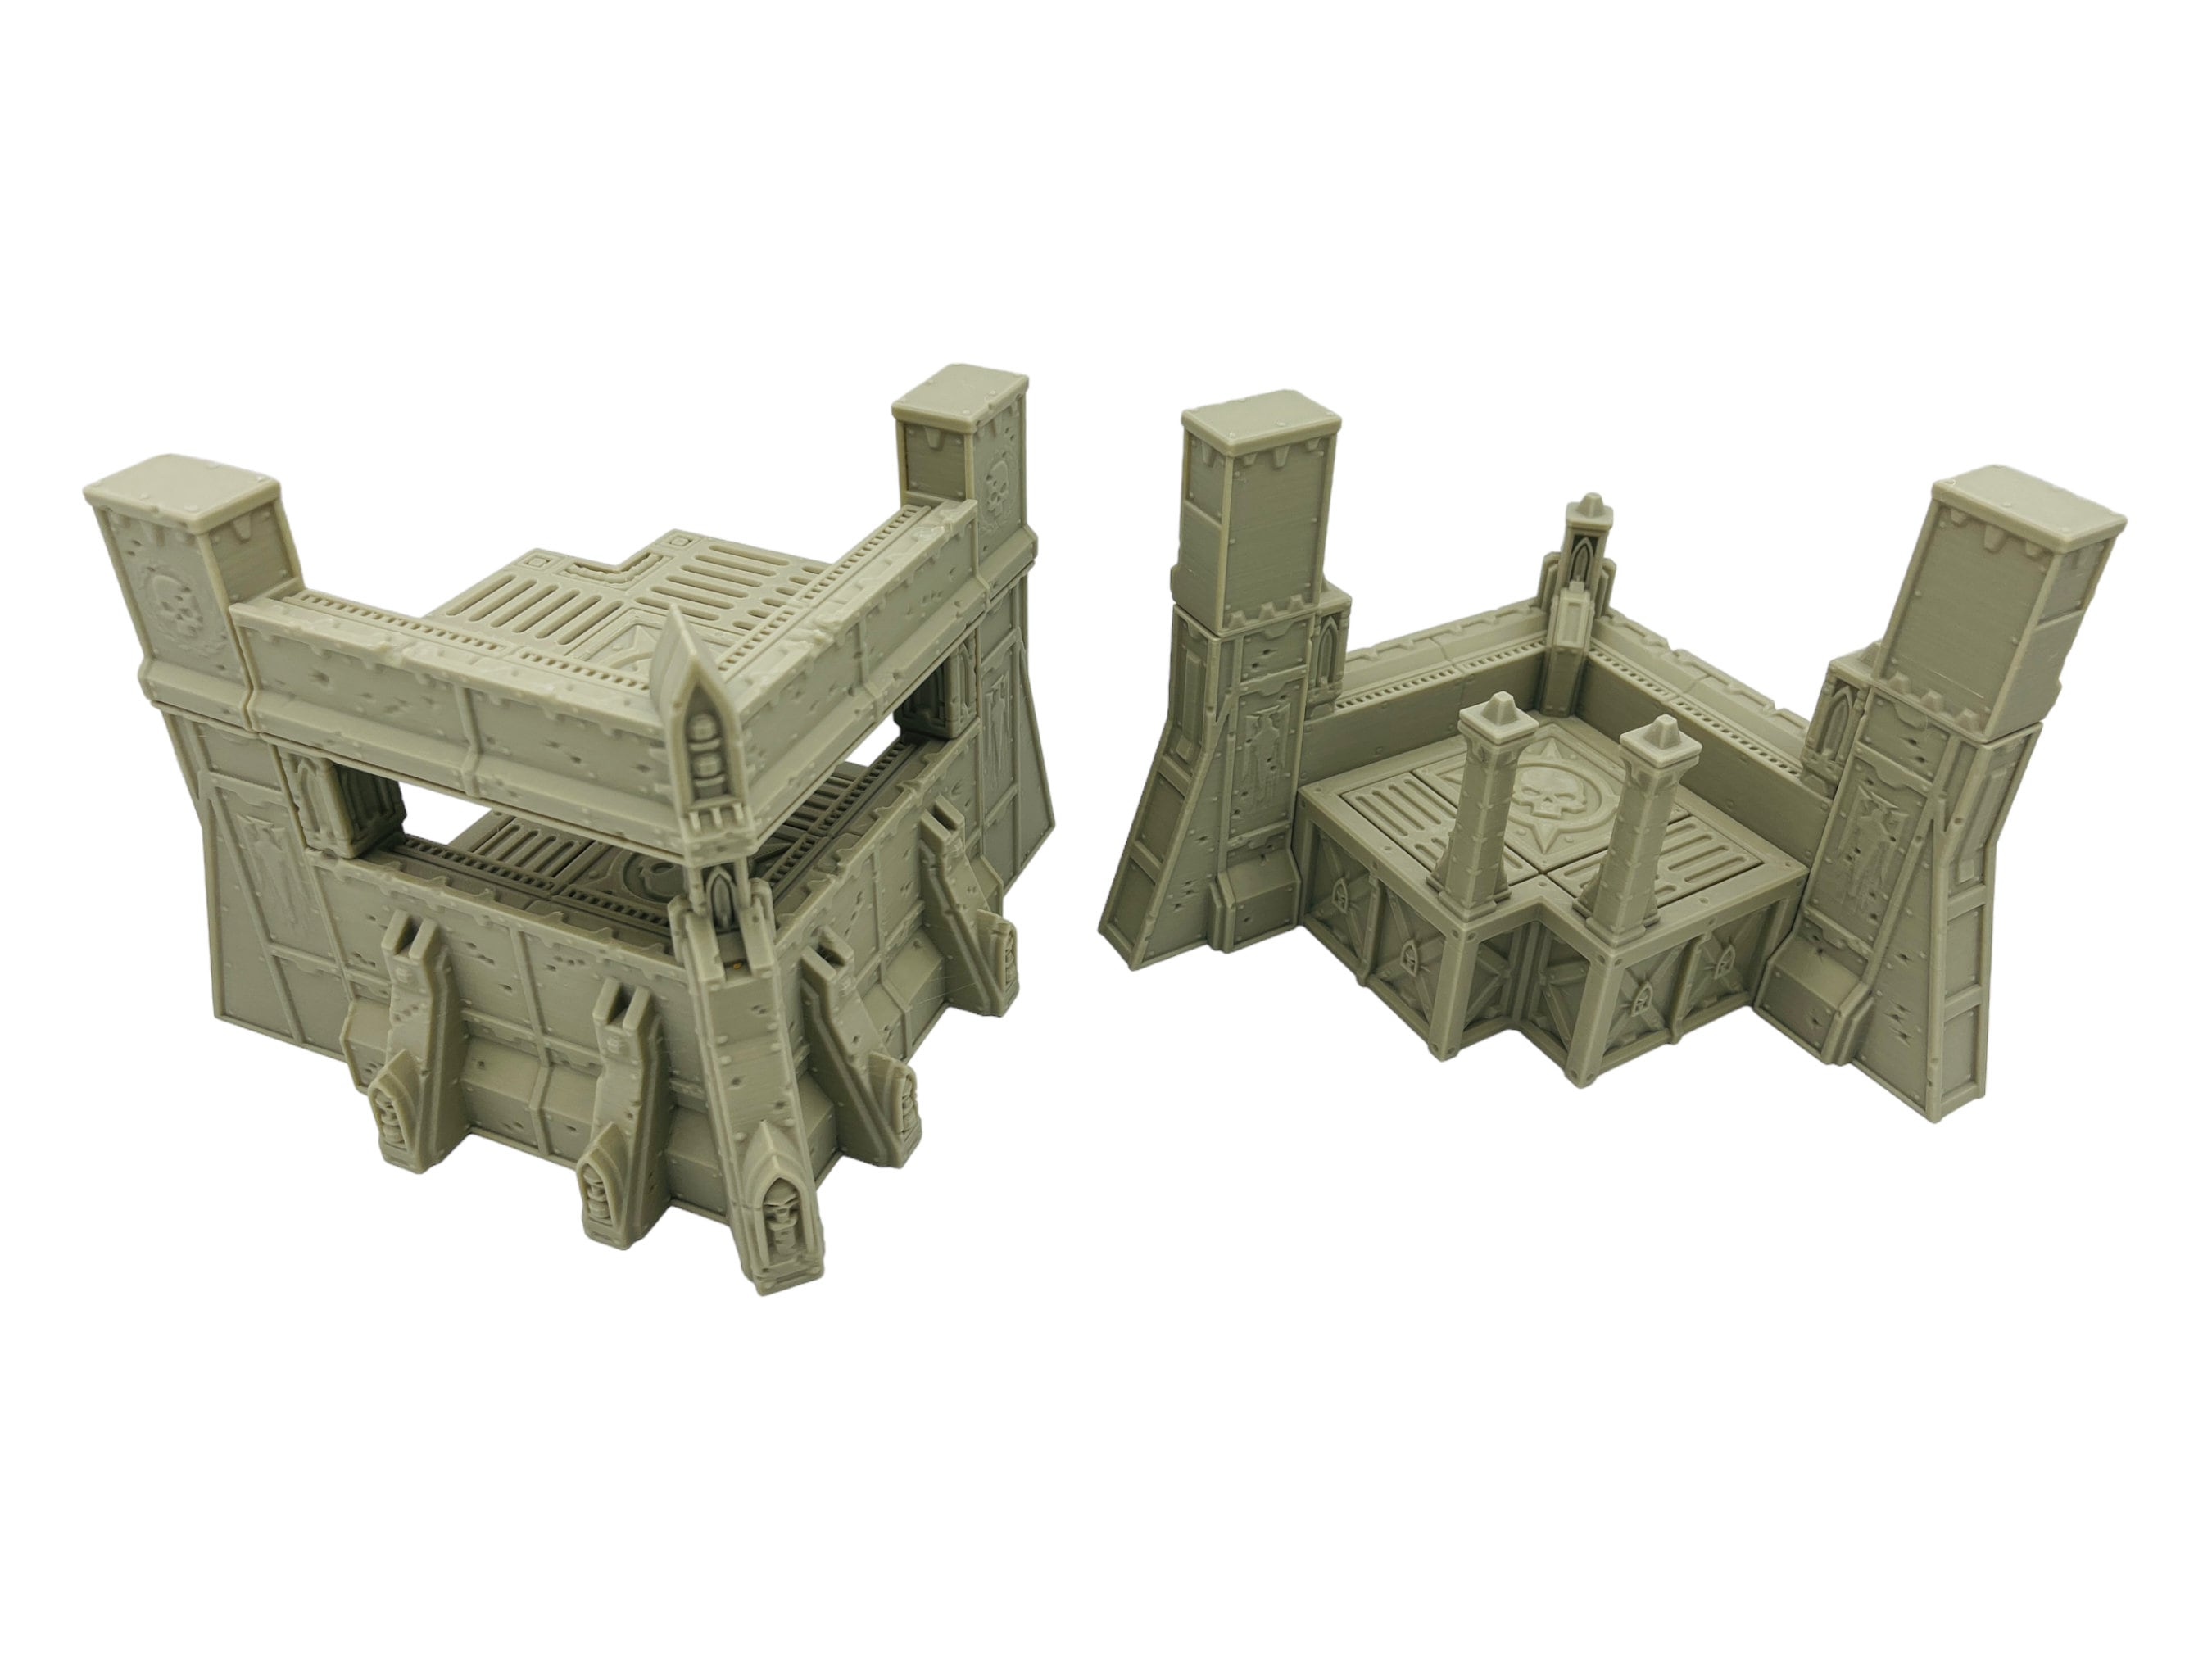 Ruins of the Empire Fortification 1 / Forbidden Prints / RPG and Wargame 3d Printed Tabletop Terrain / Licensed Printer